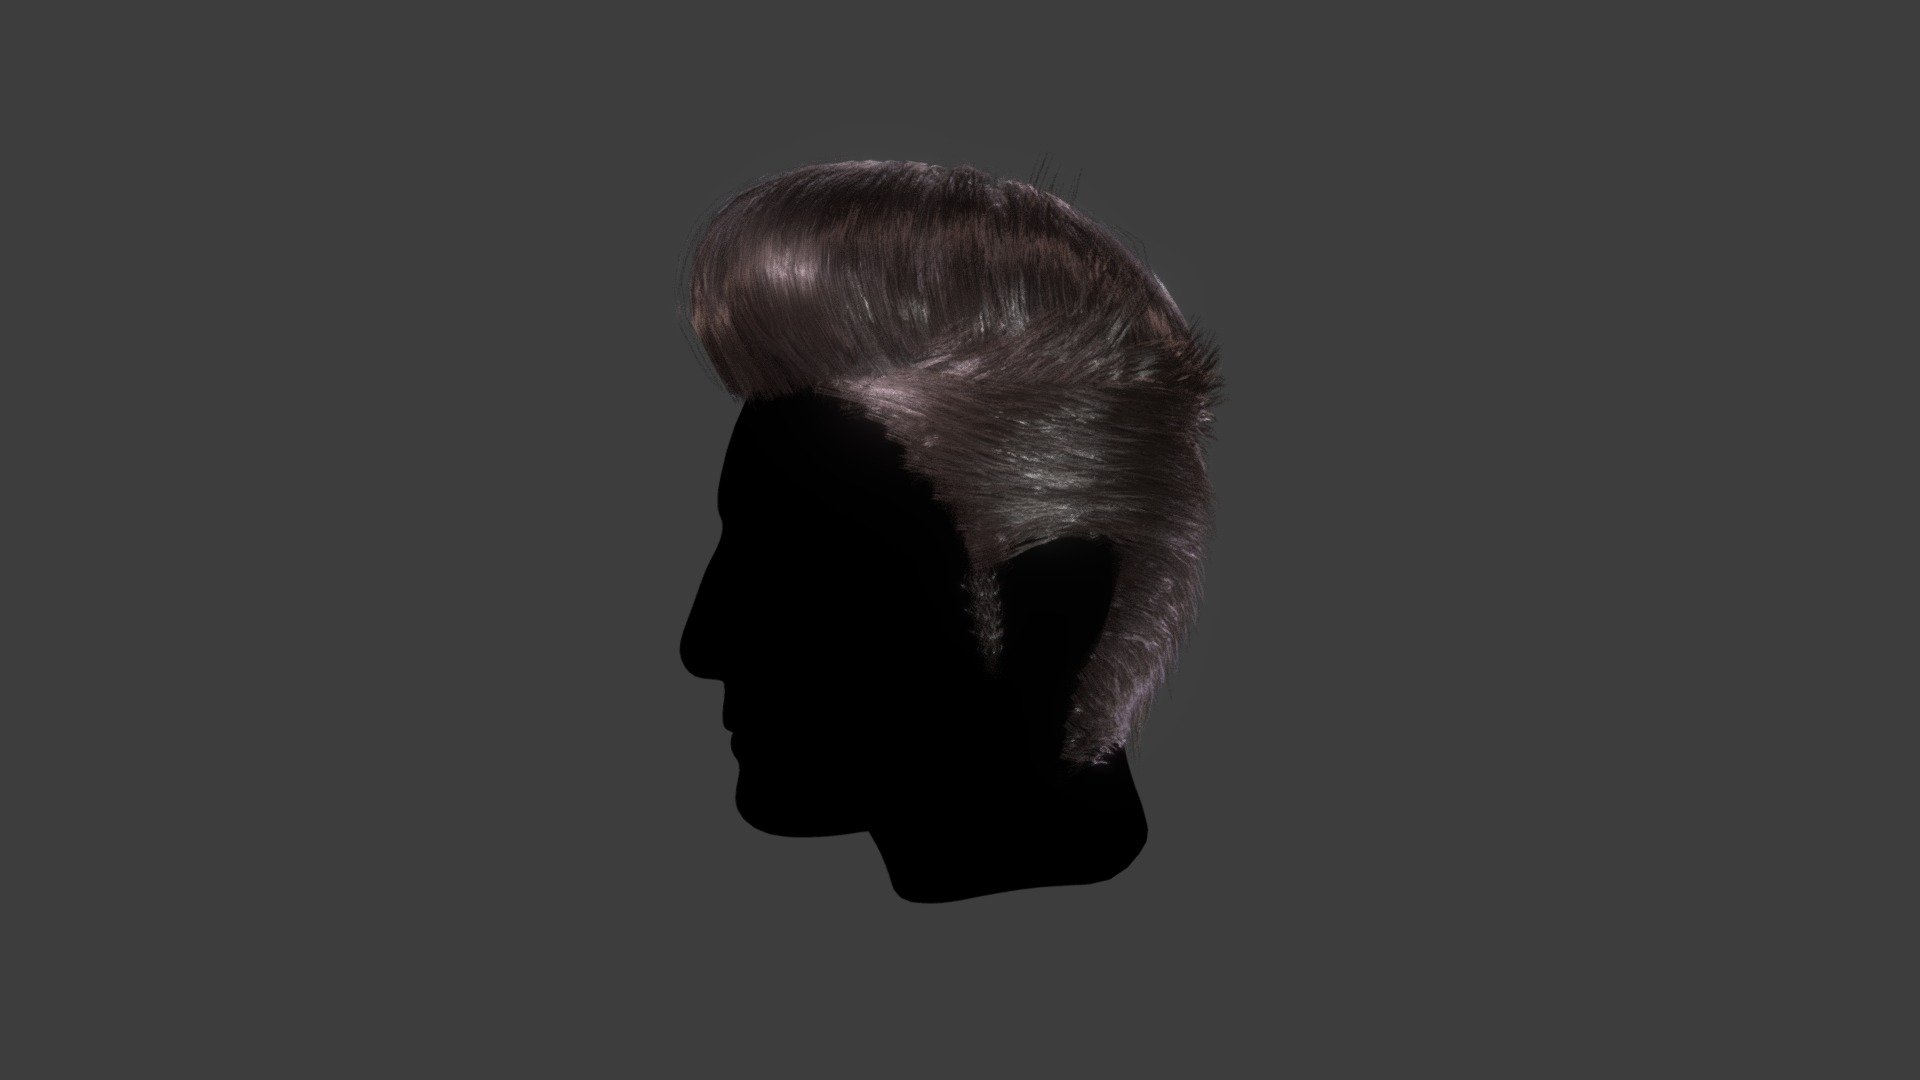 Check out my website for more products and better deals! ➜ SM5 by Heledahn 


This is a digital 3d model of a pompadour hairstyle. 

The blender file can be customized to any color though the Transhuman Lite - MESH HAIR panel (included), to choose the color, add highlights, increase or decrease the amount, add root color and spread, etc.

The model also includes shape keys to further customize the shape and feel of the hairstyle.

 


This model can be used as a closeup prop due to its high detail and visual quality, and it can be adapted to any 3D character, to achieve a wonderful realistic effect.

This product will achieve realistic results in your rendering projects and animations, being greatly suited for close-ups due to their high quality topology and PBR shading 3d model